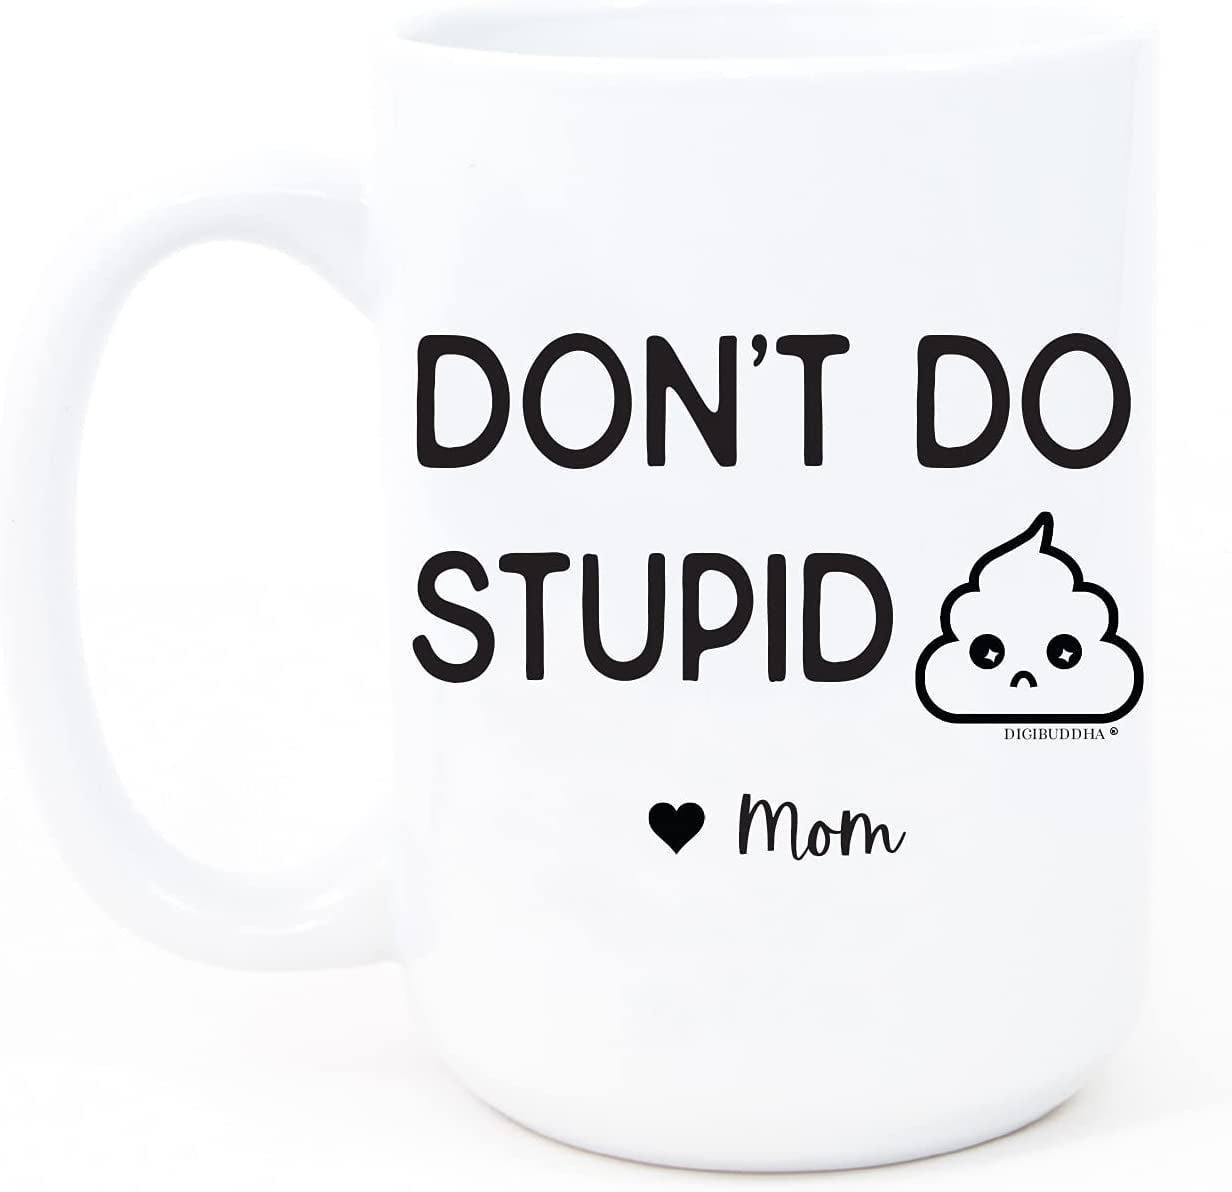 5Aup Funny Coffee Mug for Teens, Keep Calm I'm A Teenager Fun Cups for  College Students Teen Boys and Girls White, 11 Oz